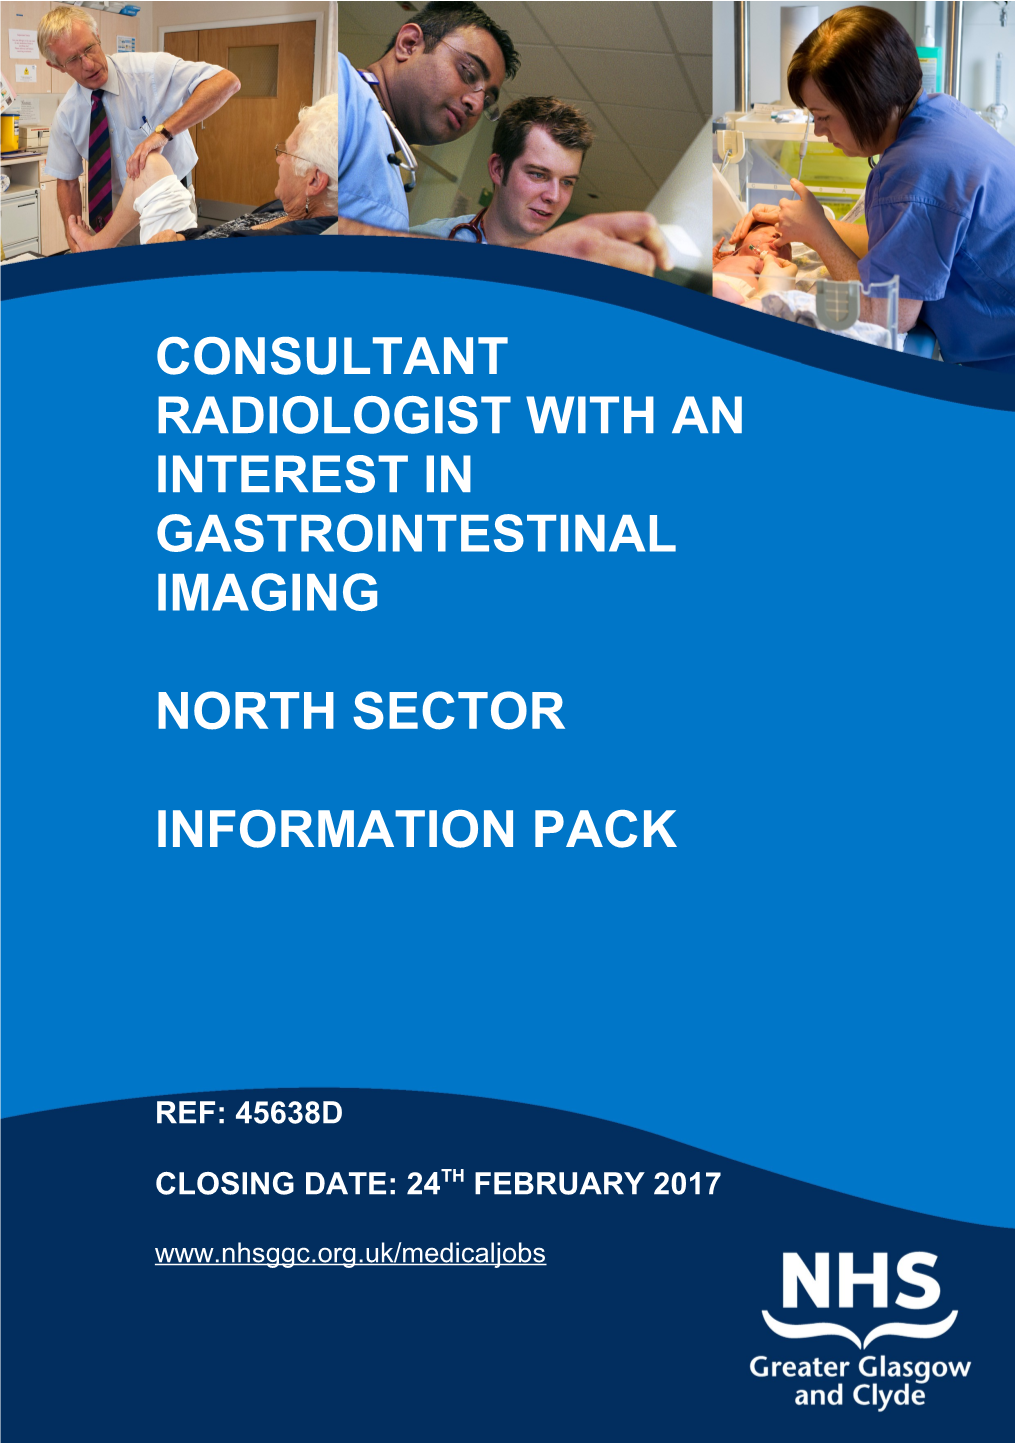 Consultant Radiologist with an Interest in Gastrointestinal